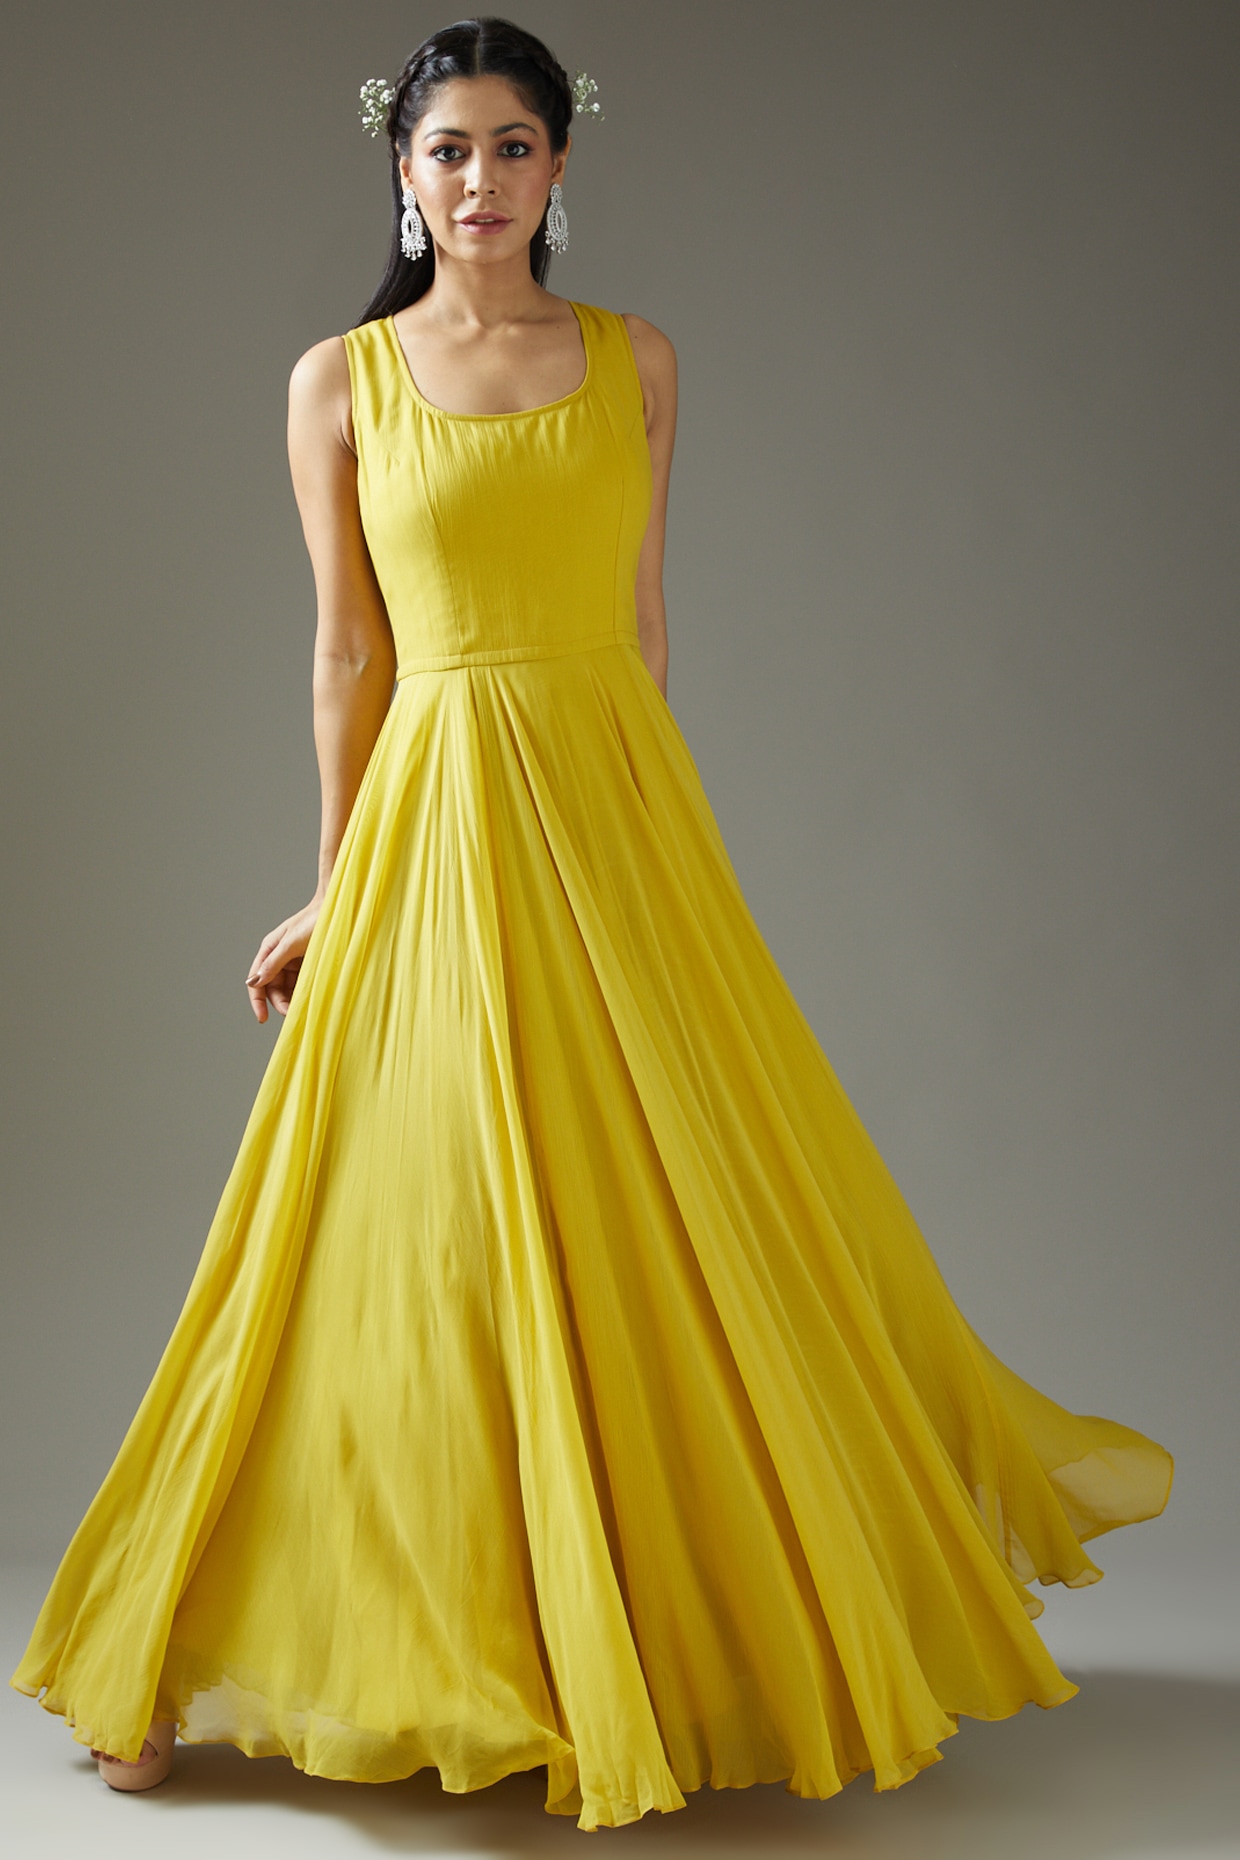 Canary Yellow Bridesmaid Dresses & Canary Yellow Gowns